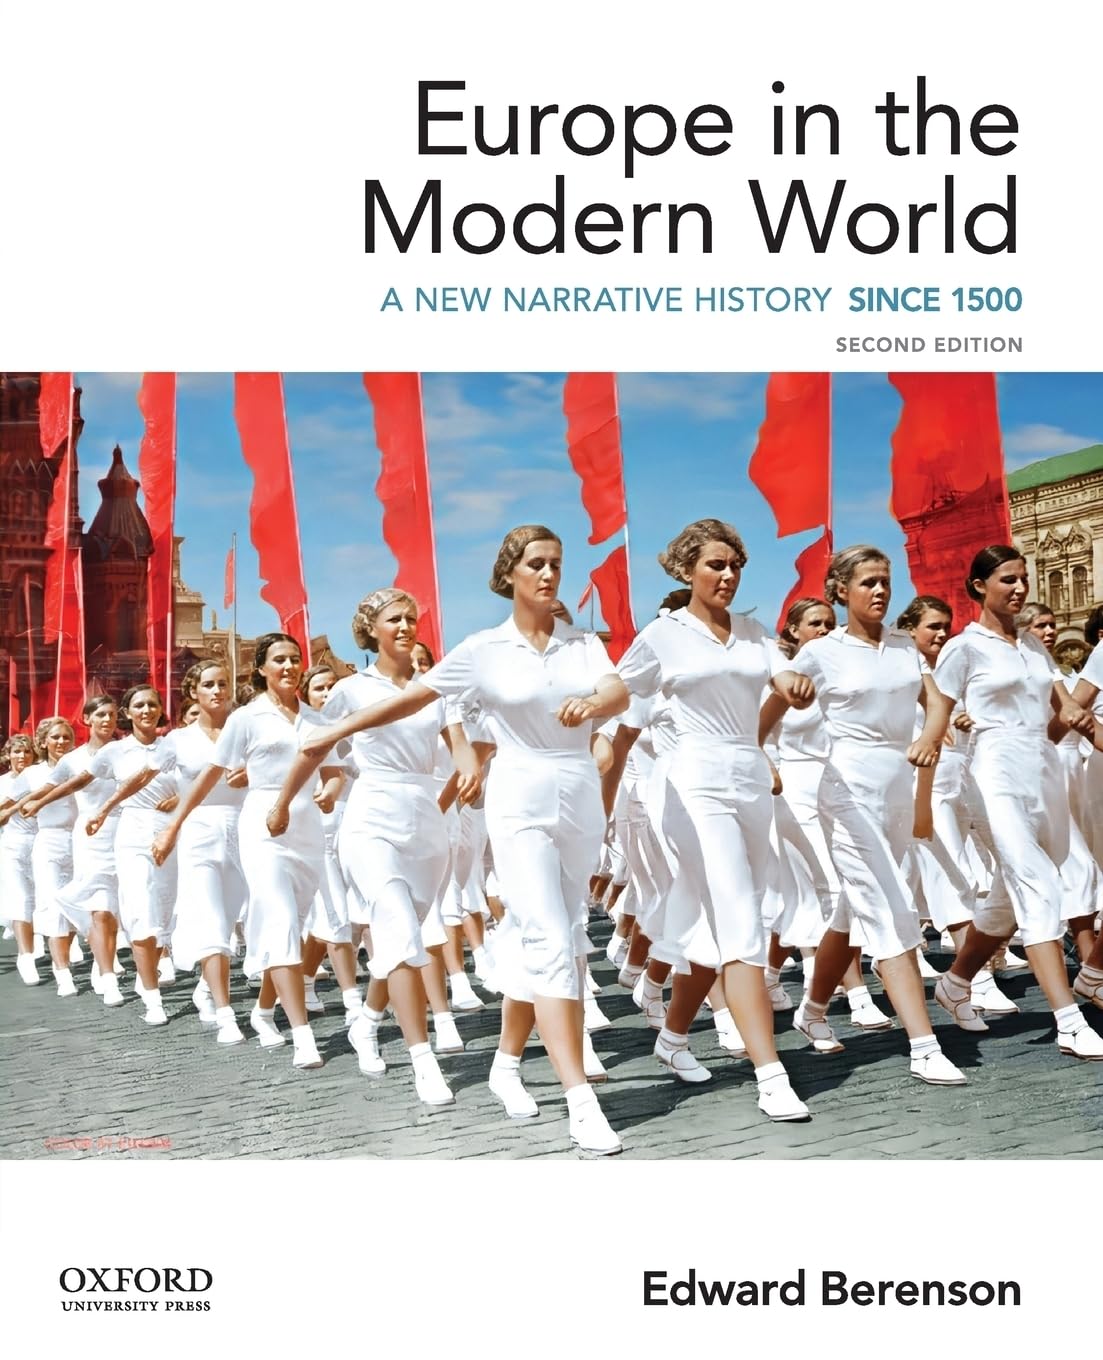 Europe in the Modern World: A New Narrative History 2nd Edition - PDF eBook